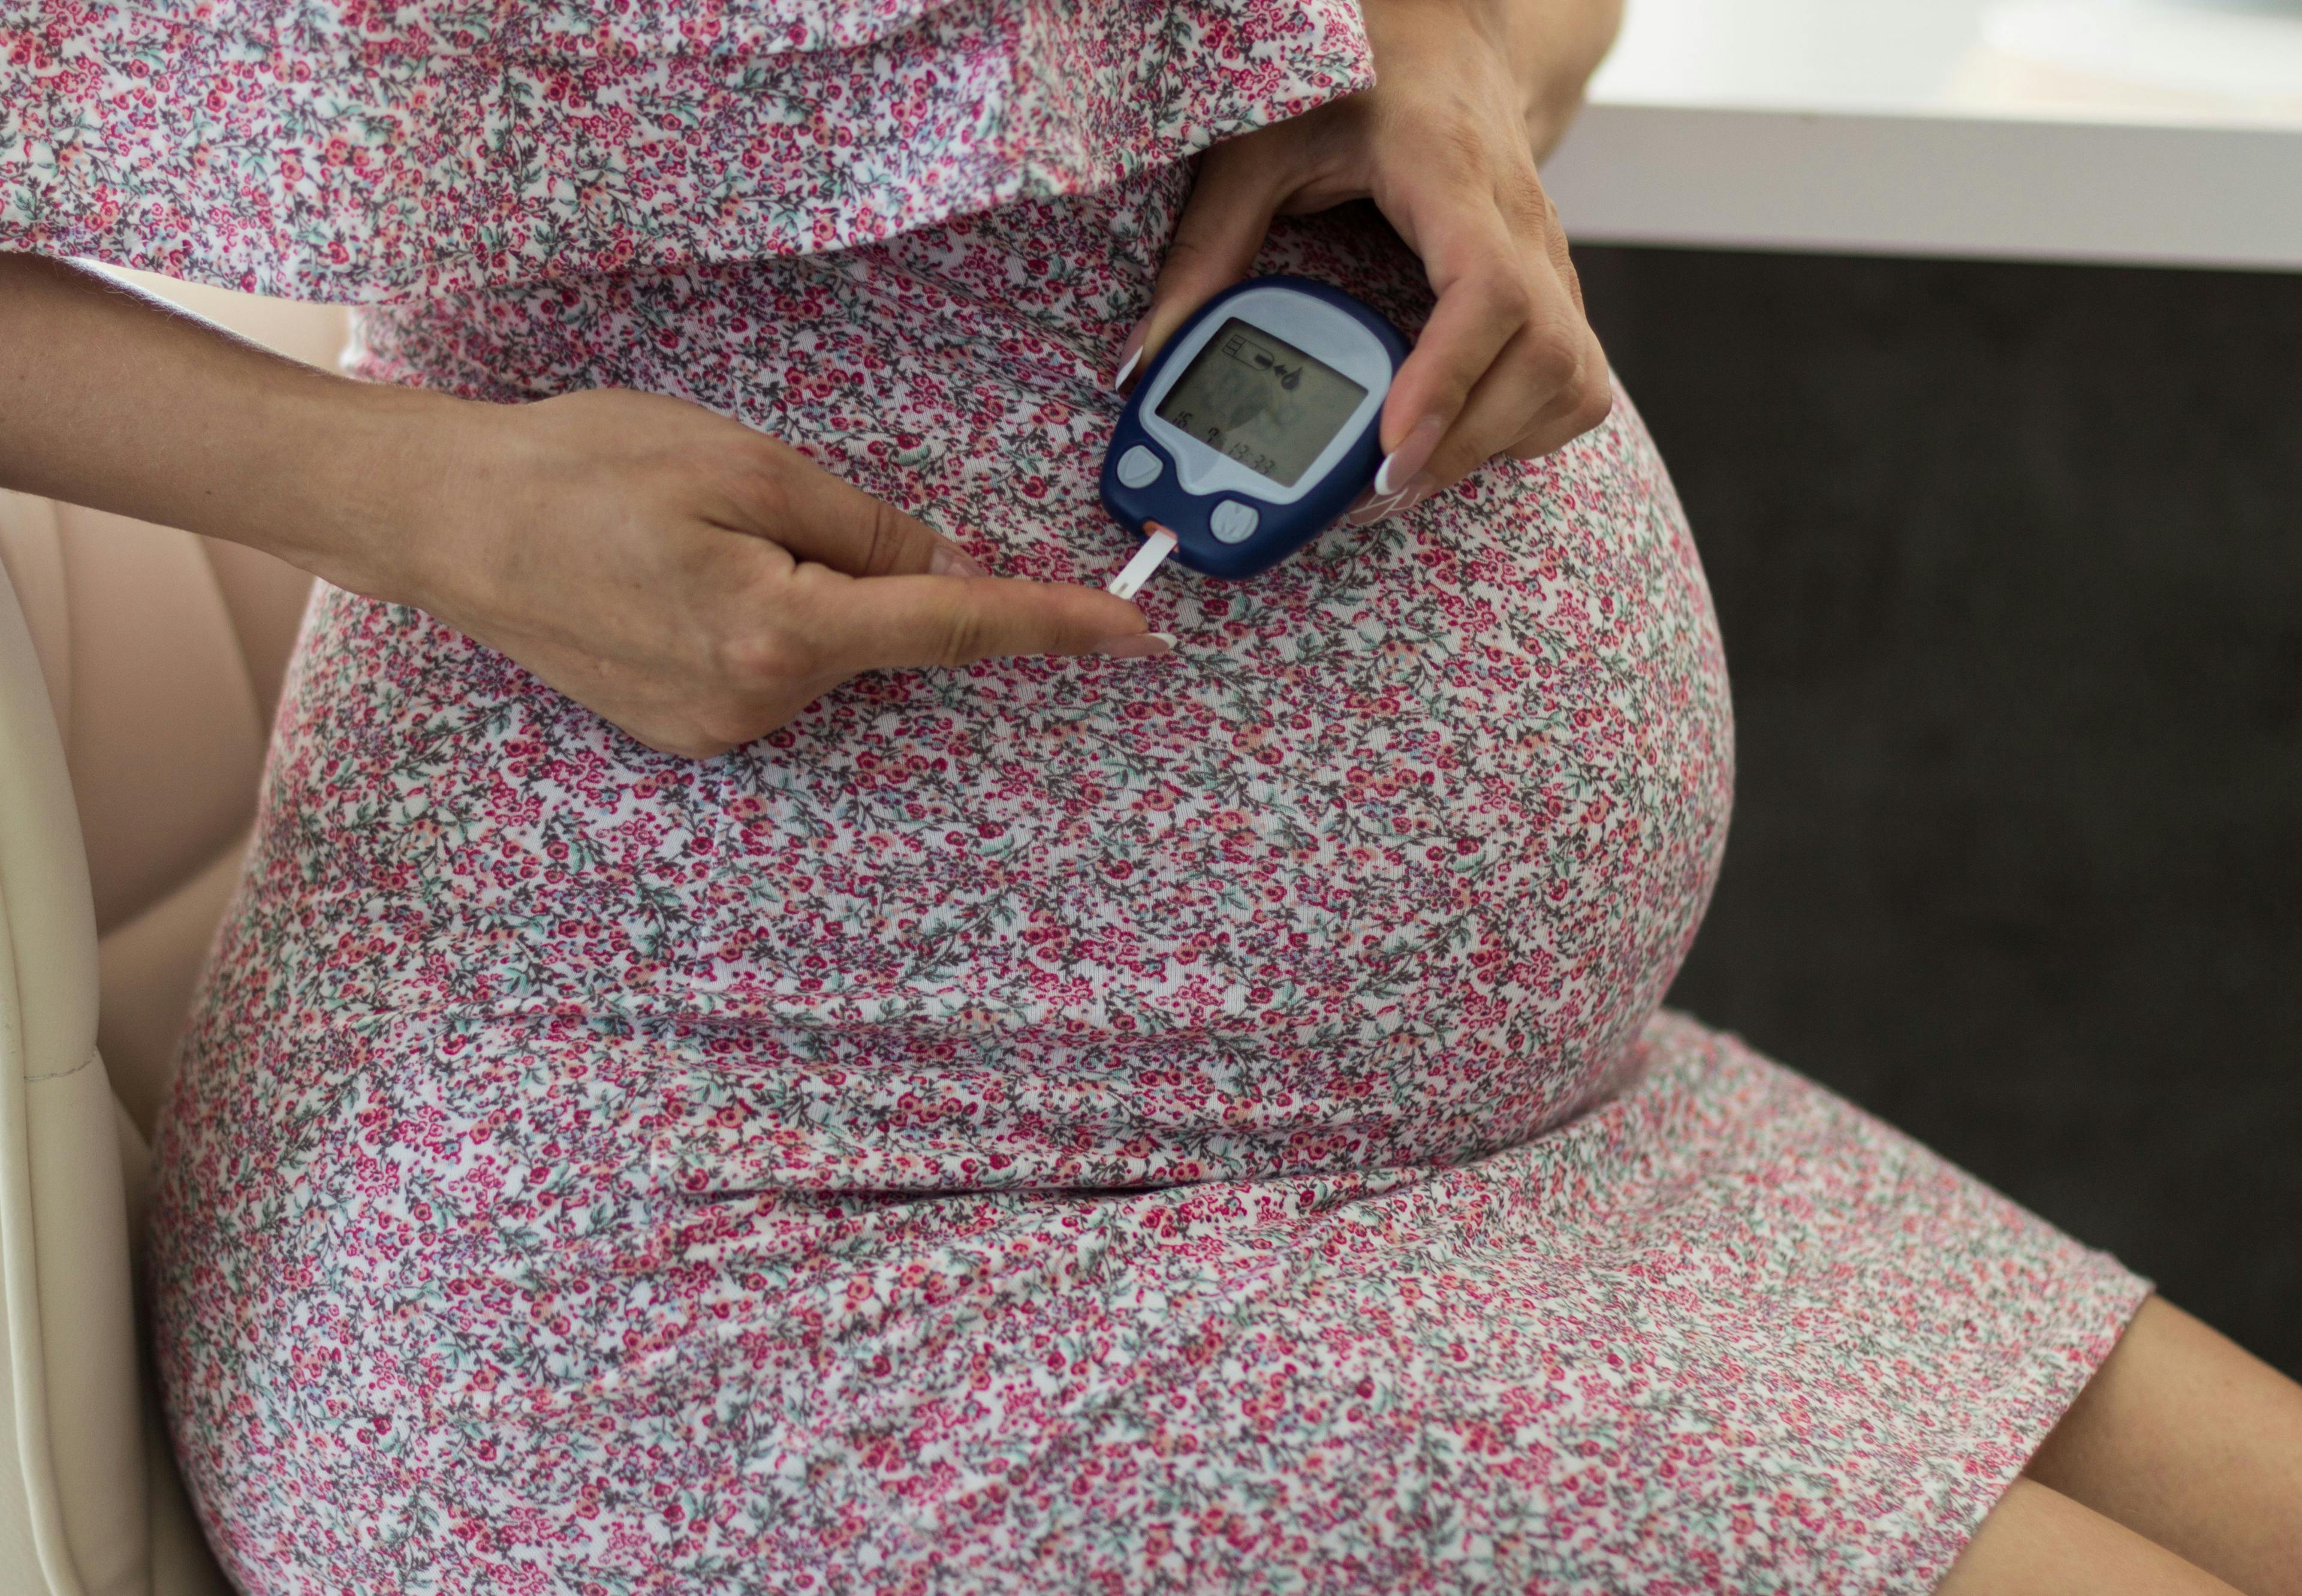 Pregnant Women With Diabetes at Increased Risk of Anxiety, Depression